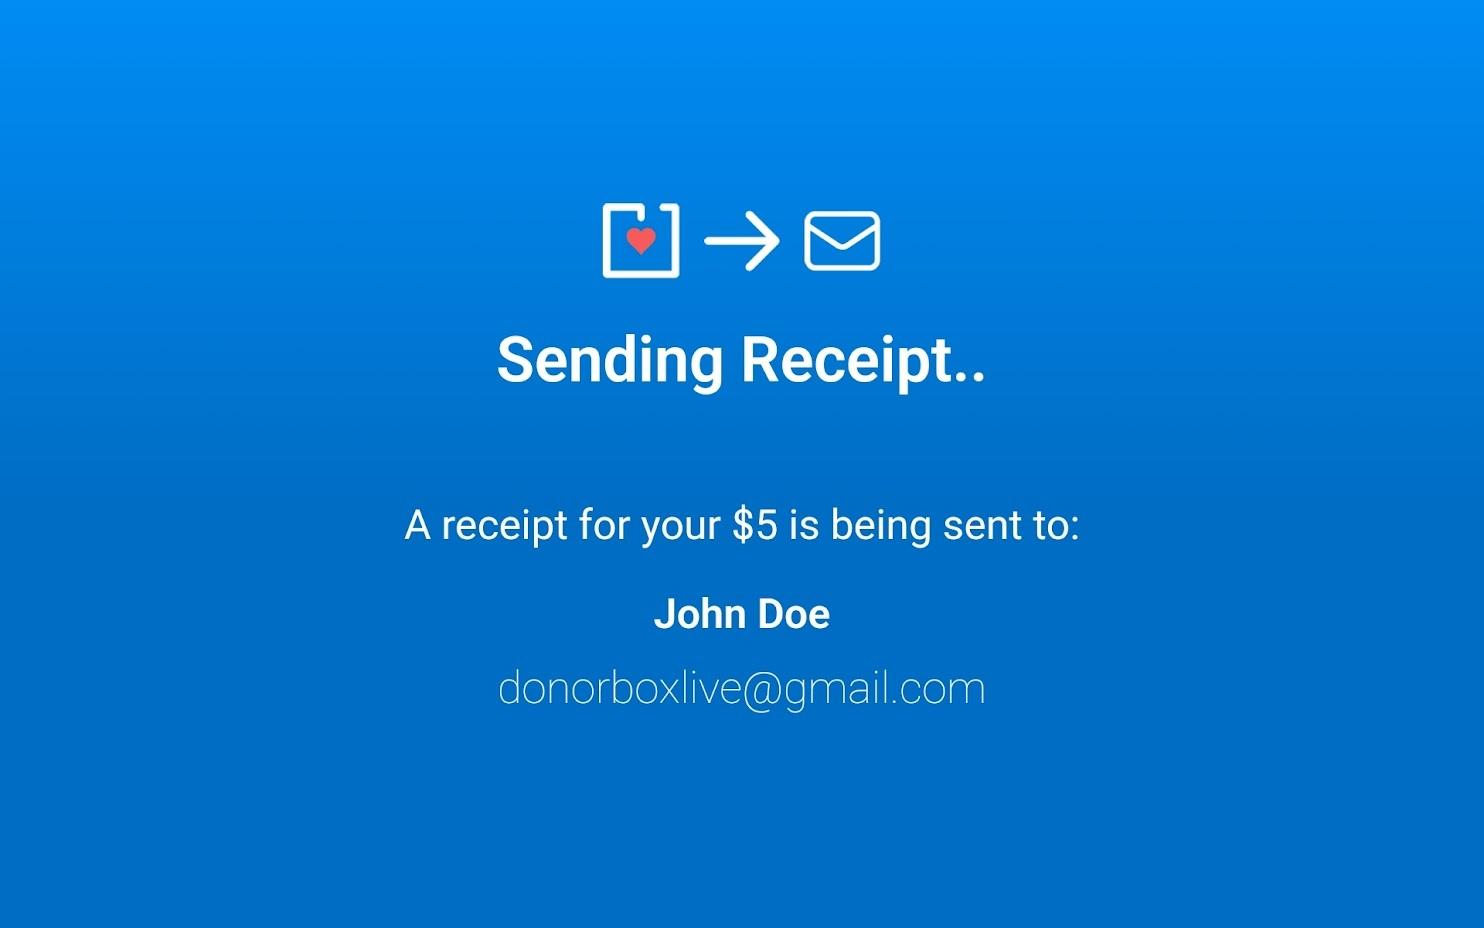 donation receipt after donating on donorbox live app